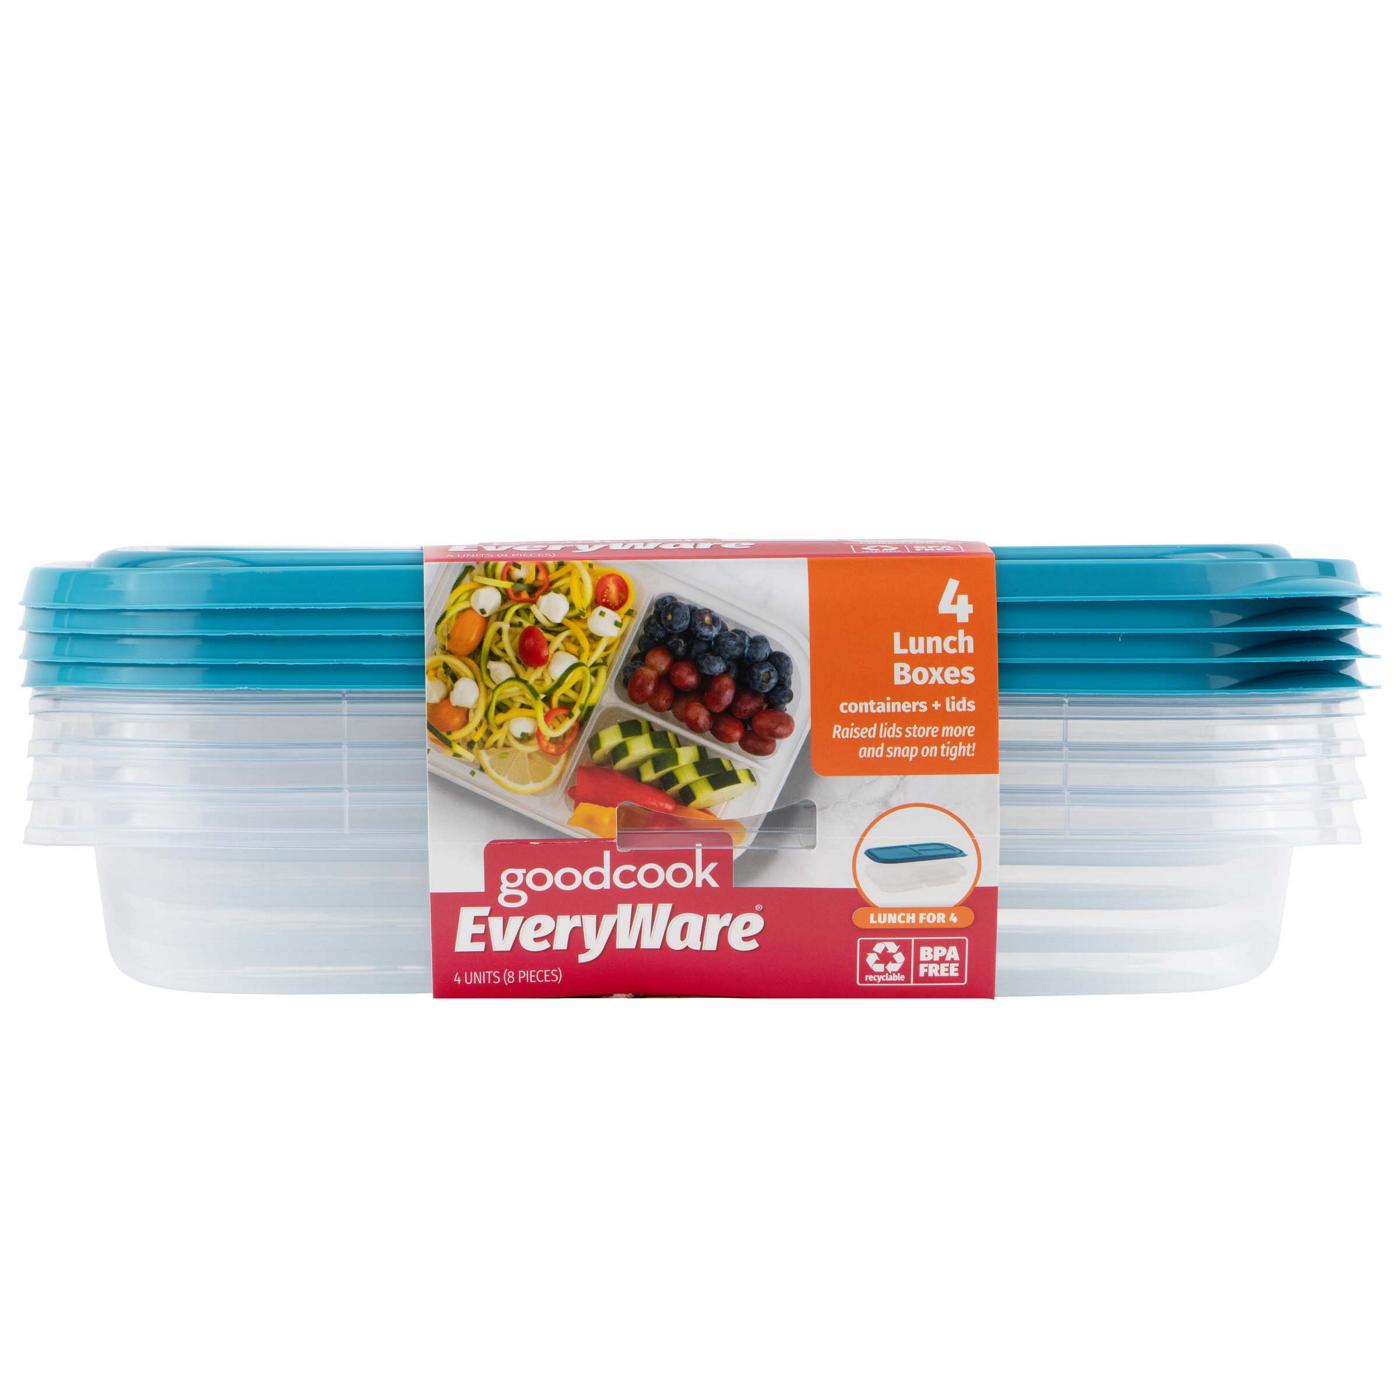 GoodCook EveryWare Lunch Box Containers; image 1 of 4